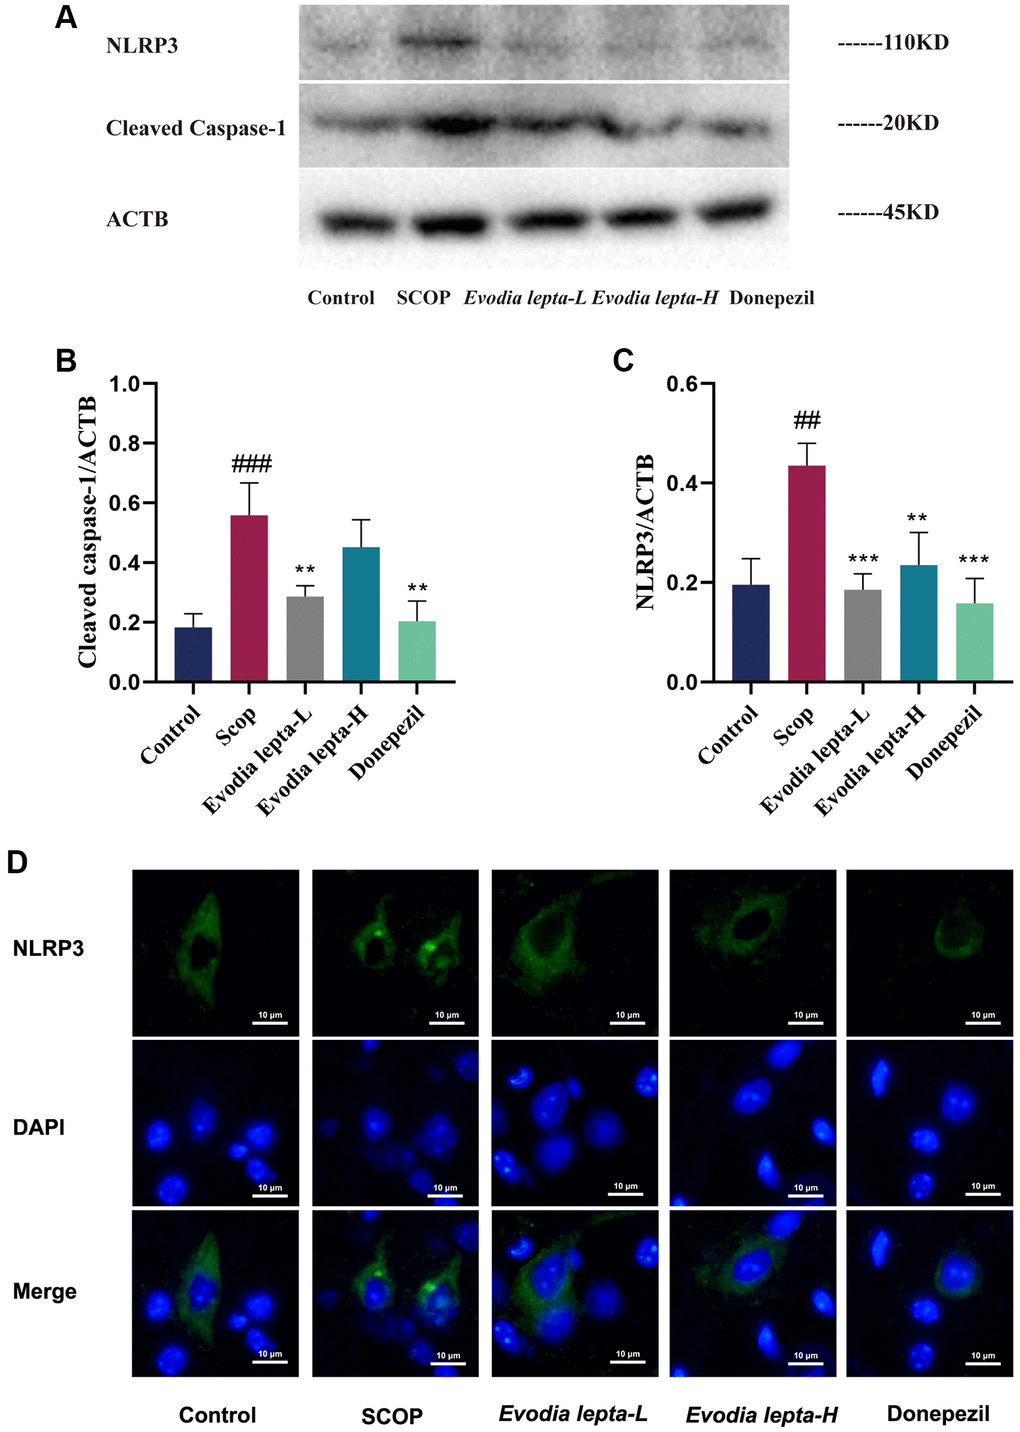 Evodia lepta extract inhibits NLRP3 inflammasome in scopolamine-treated mice. (A) Western blot of NLRP3 and Cleaved Caspase-1. (B, C) The expressions of NLRP3 and Cleaved Caspase-1. (D) Subcellular localization of NLRP3 was observed by immunofluorescence. Evodia lepta 10 (10 mg/kg/d); Evodia lepta 20 (20 mg/kg/d). Data represent mean ± SD (n = 3 per group). #P ##P *P **P 